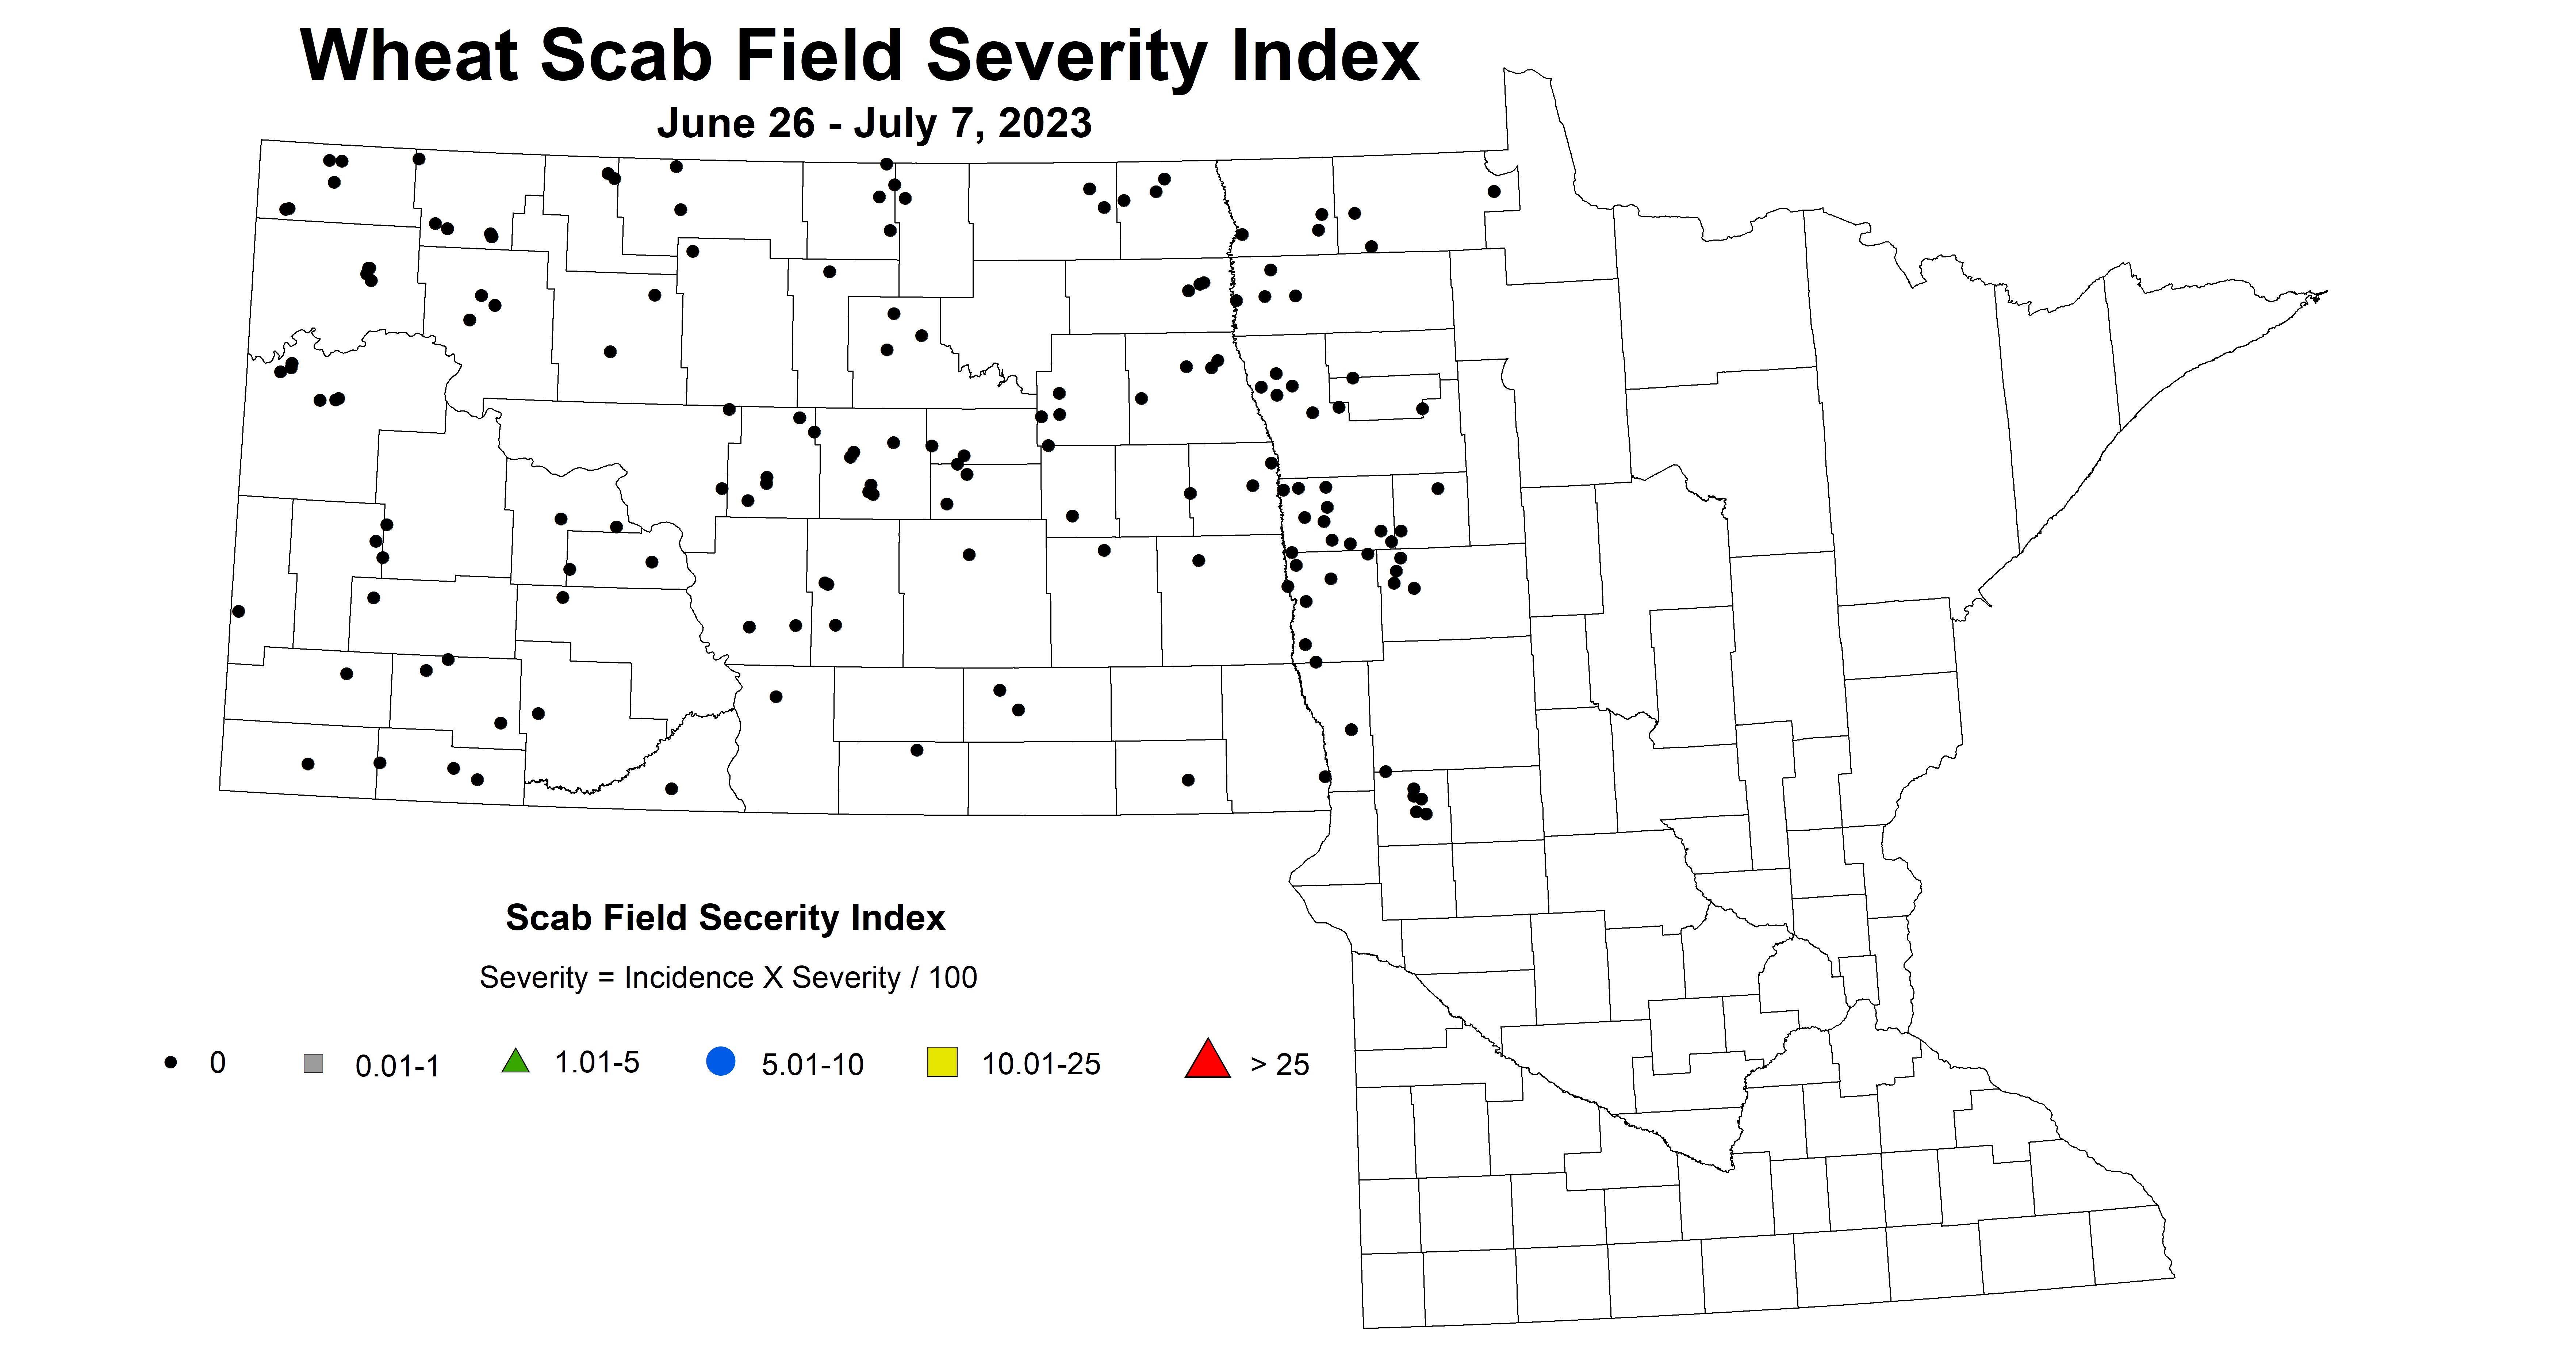 wheat scab field severity index June 26 - July 7 2023